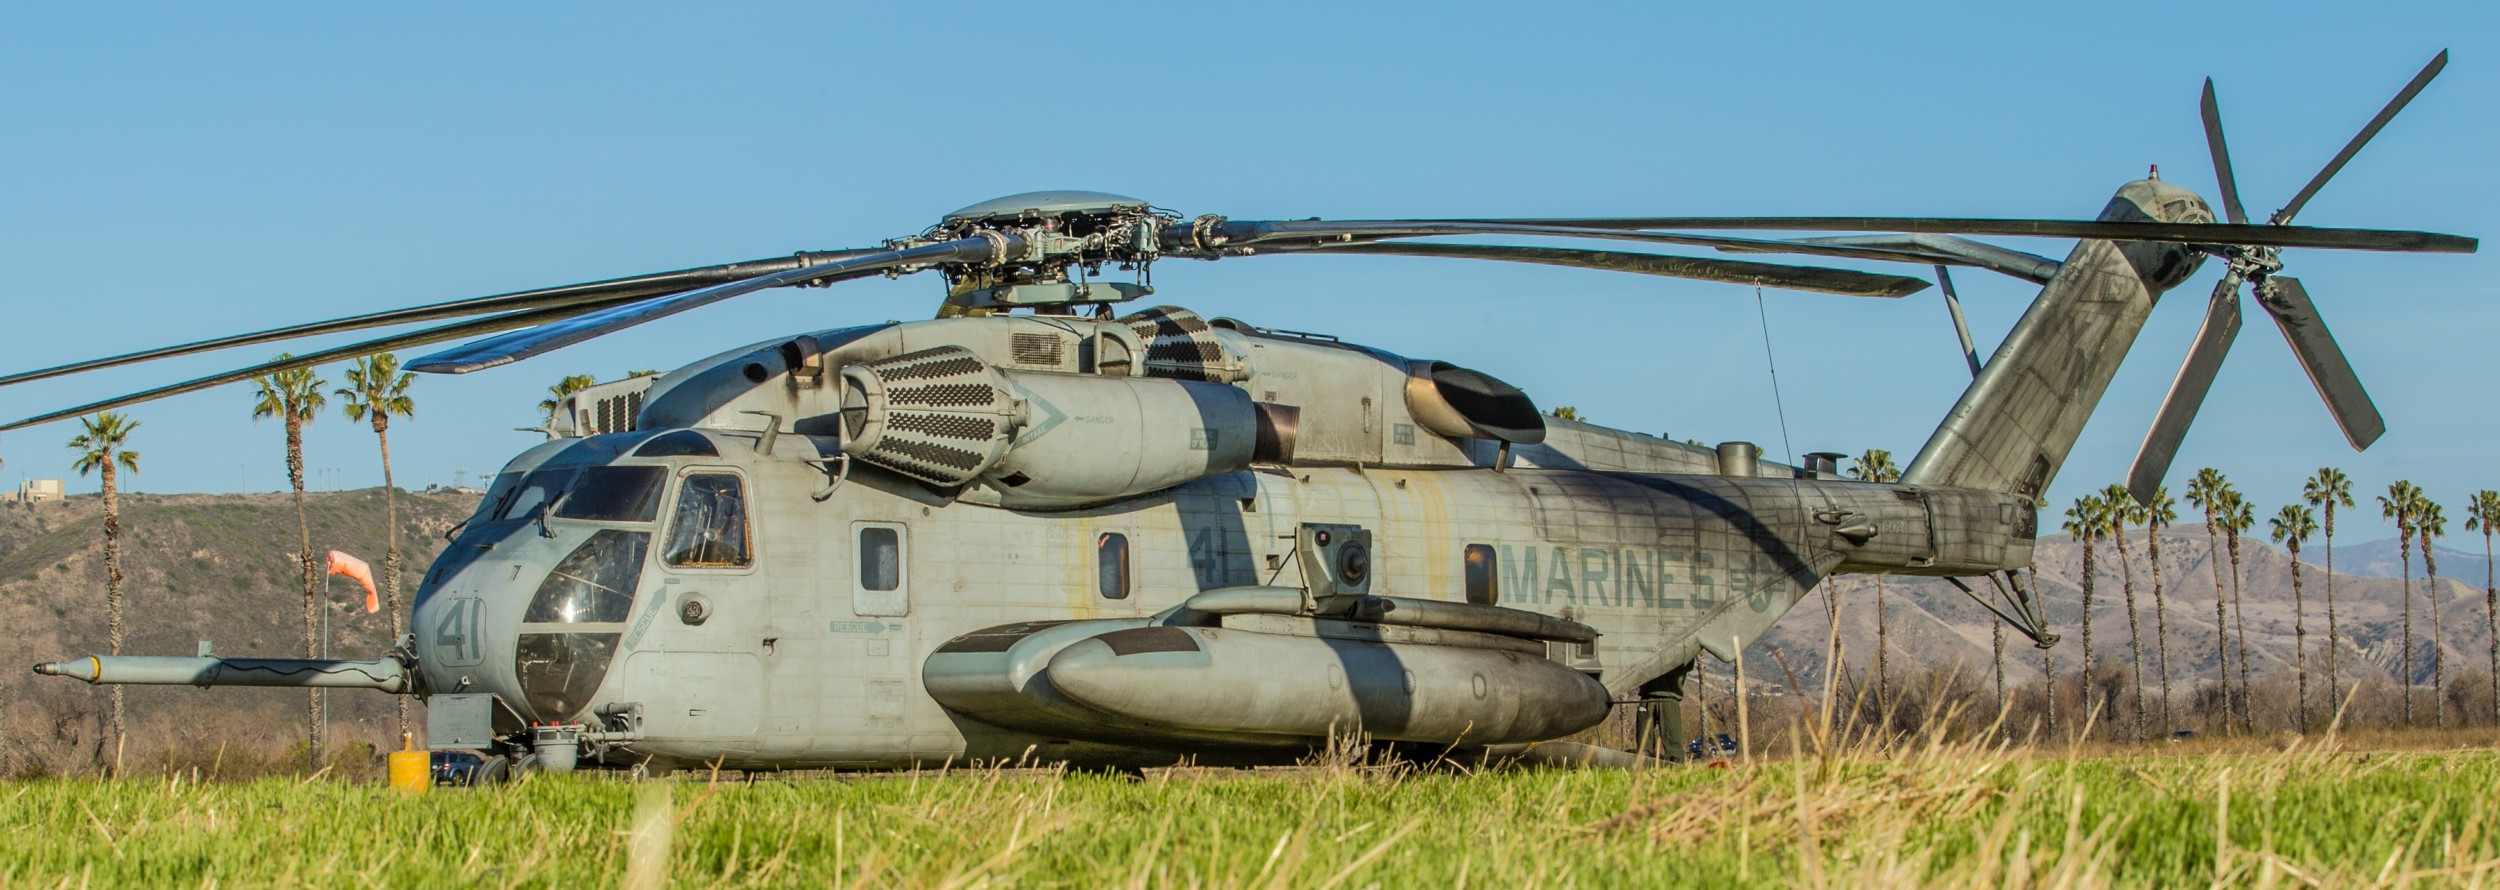 hmh-361 flying tigers marine heavy helicopter squadron usmc sikorsky ch-53e super stallion 30